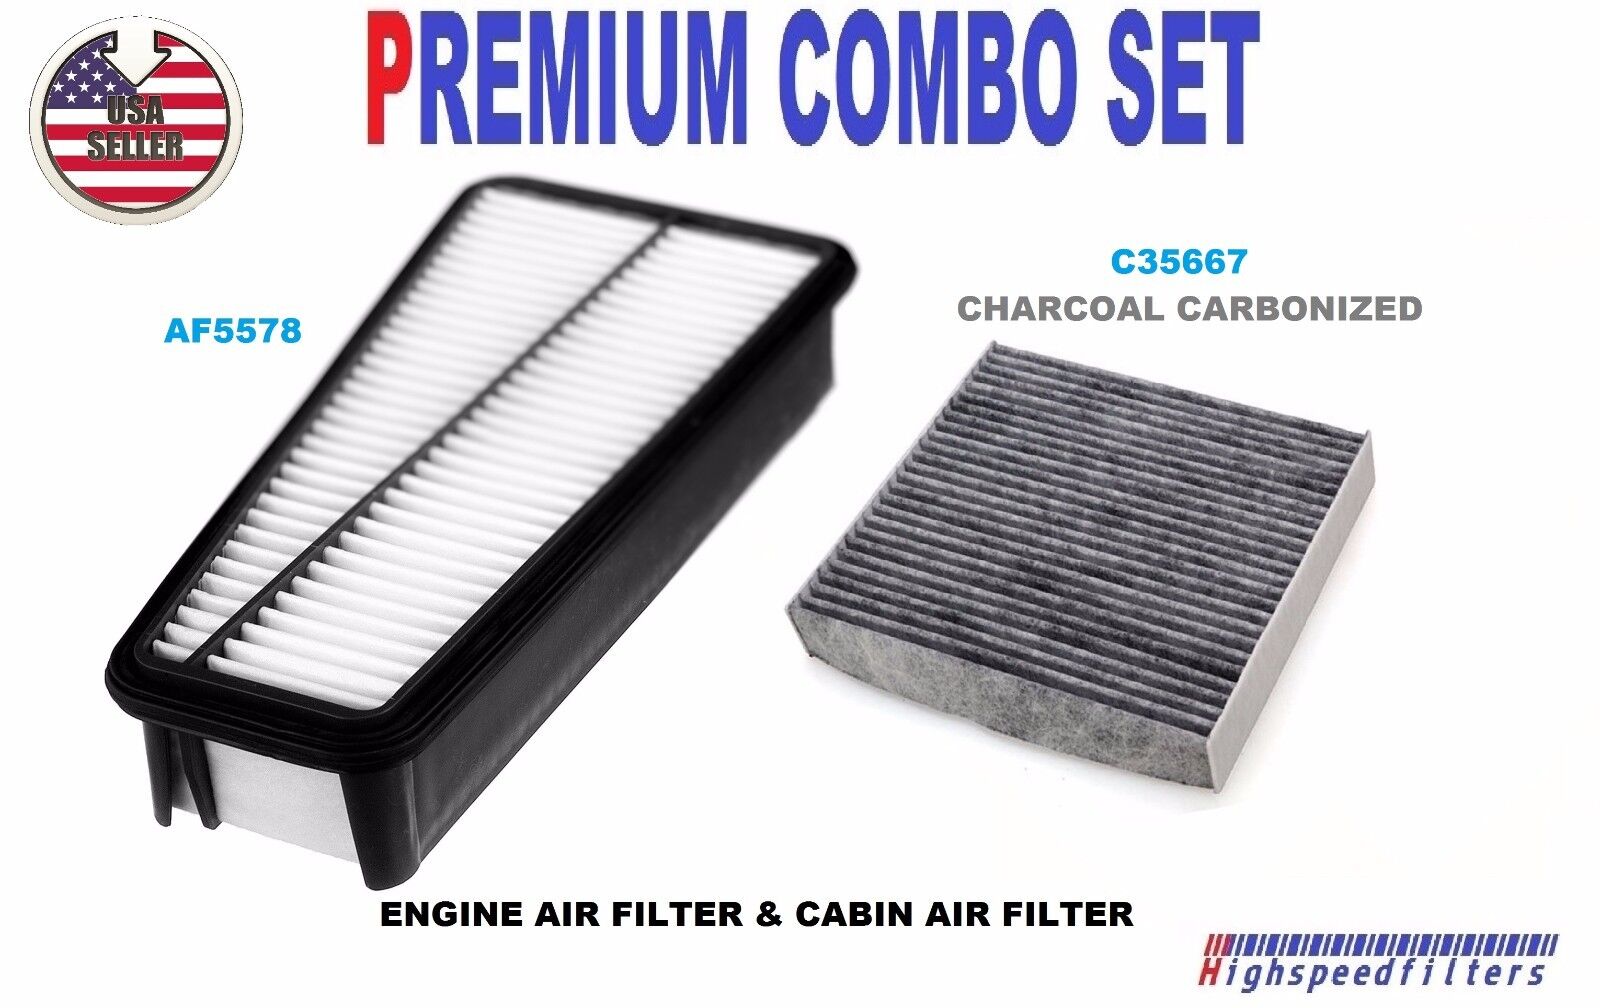 COMBO Air Filter & CARBONIZED Cabin Air Filter PACK for 07 -10 TOYOTA TUNDRA V6